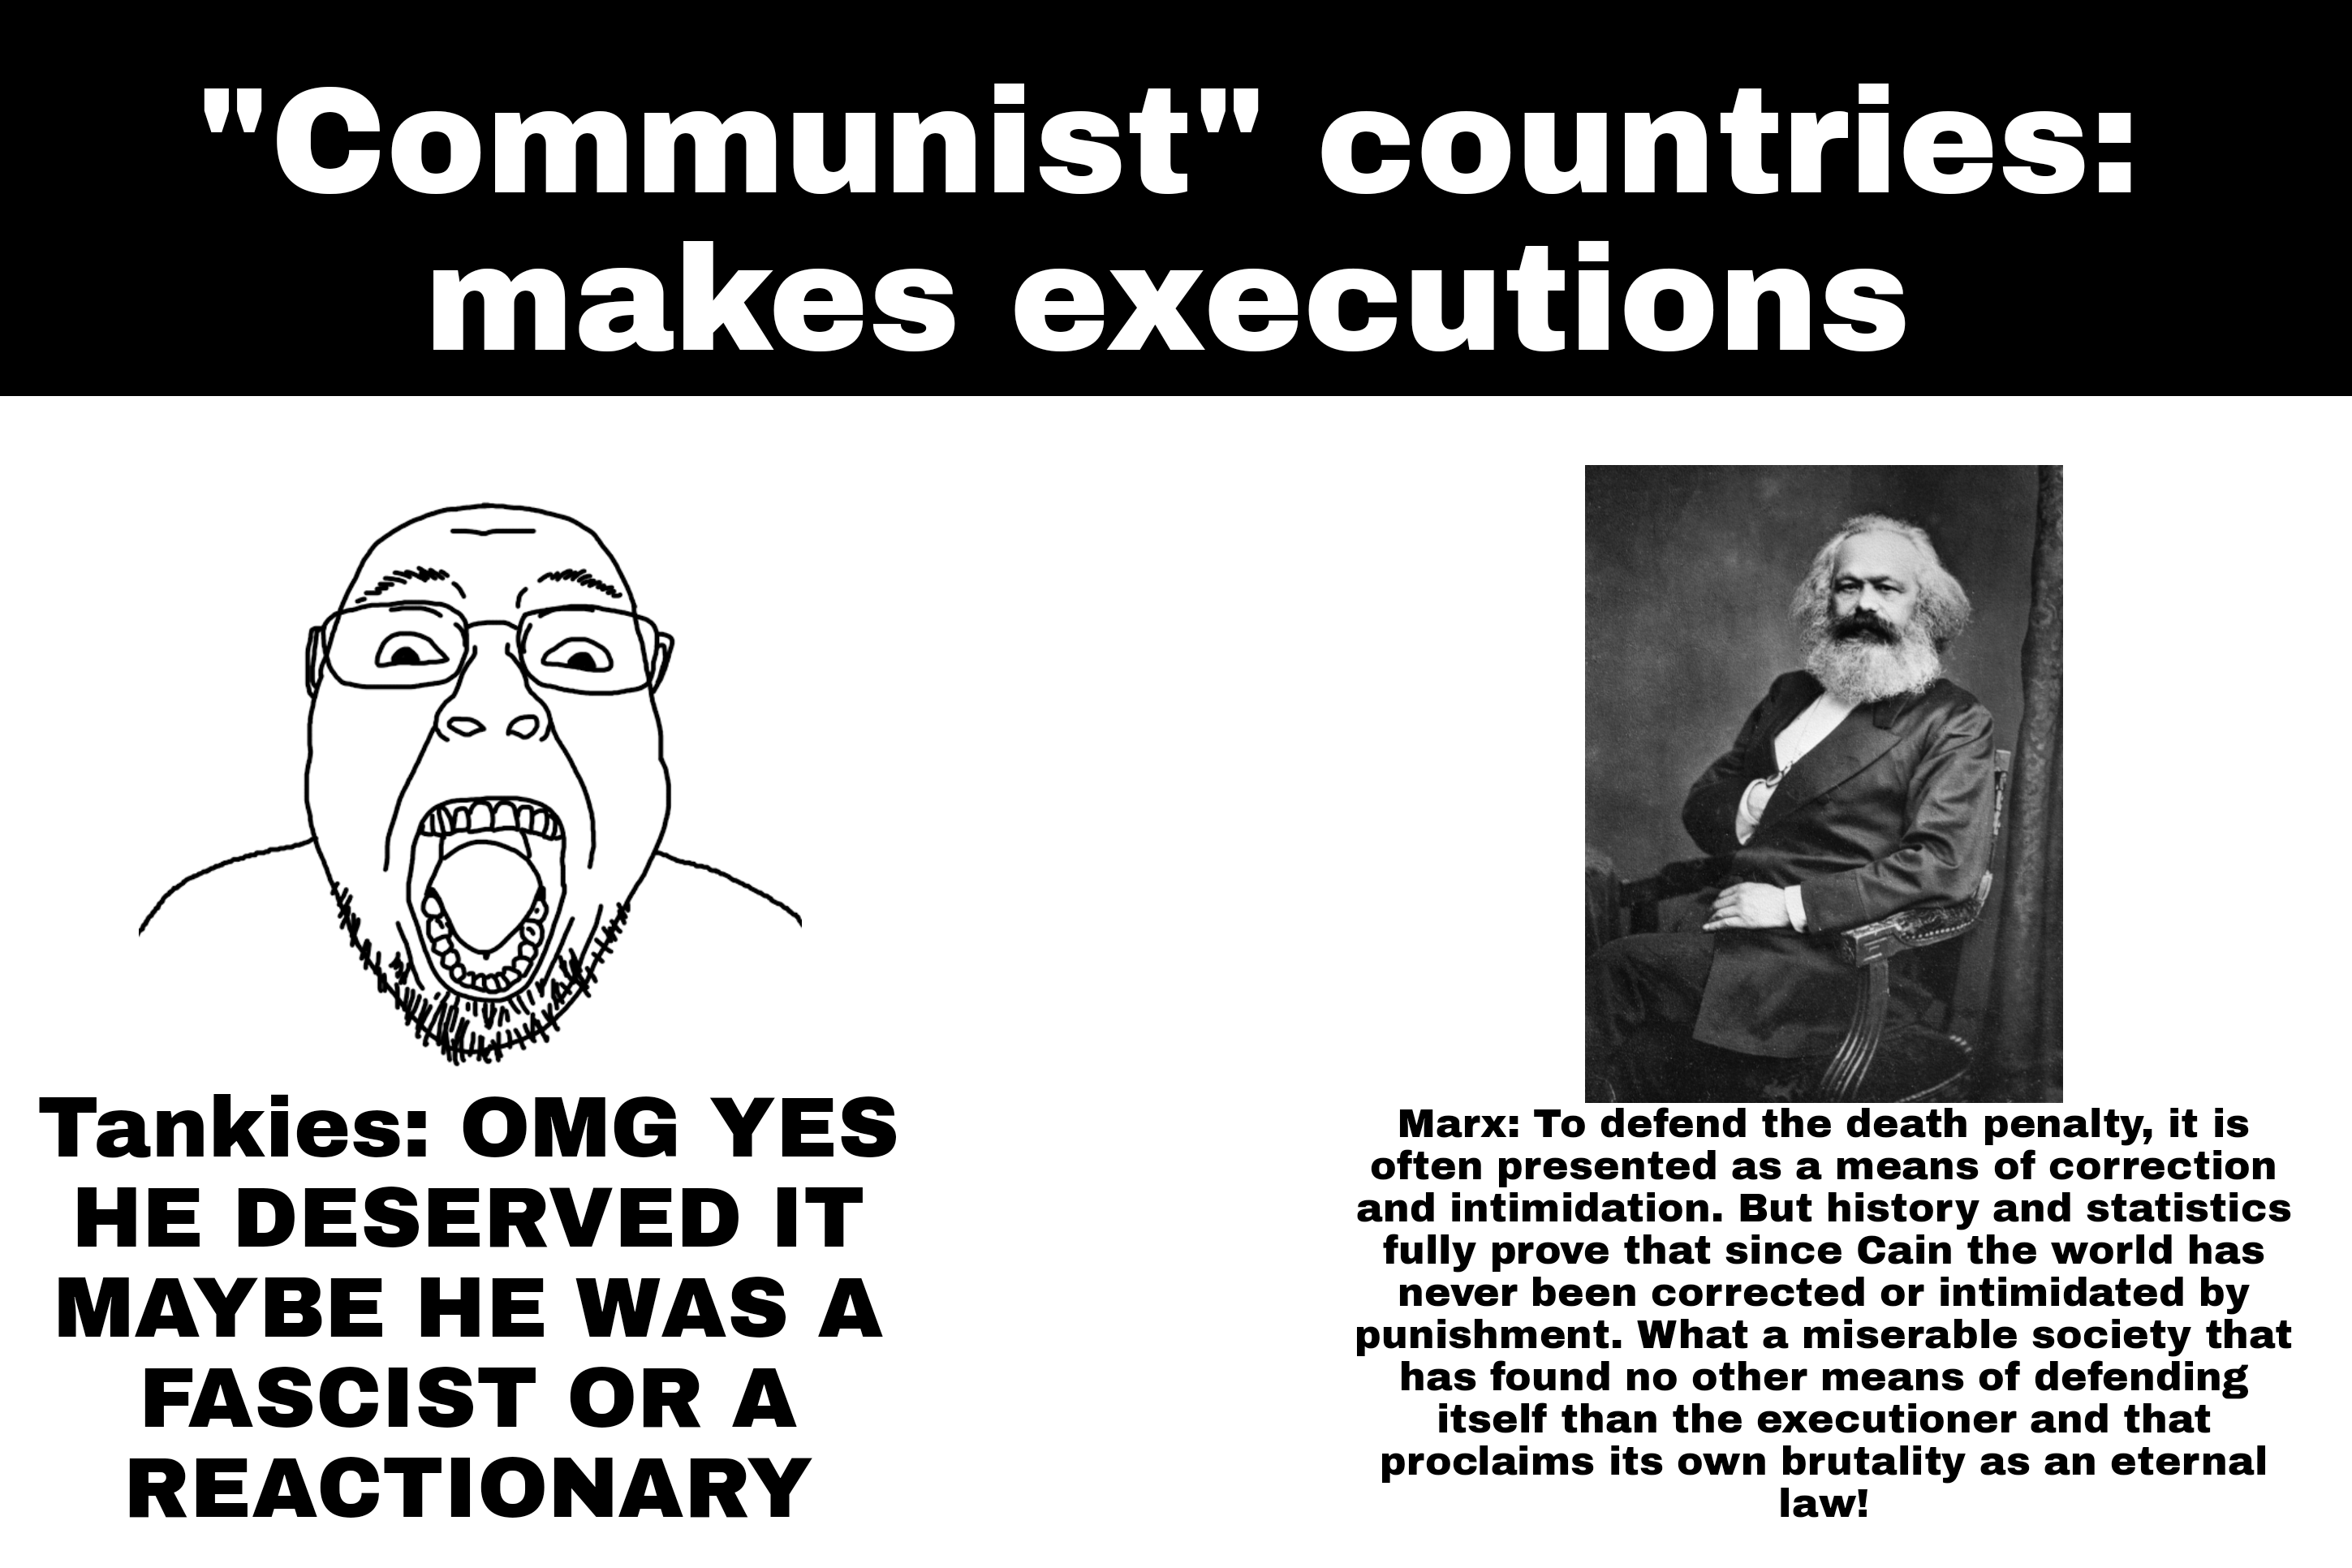 Yes, this meme looks like a normal leftist meme from the amount of text, but if i don't put everything it said i run the risk of misusing history